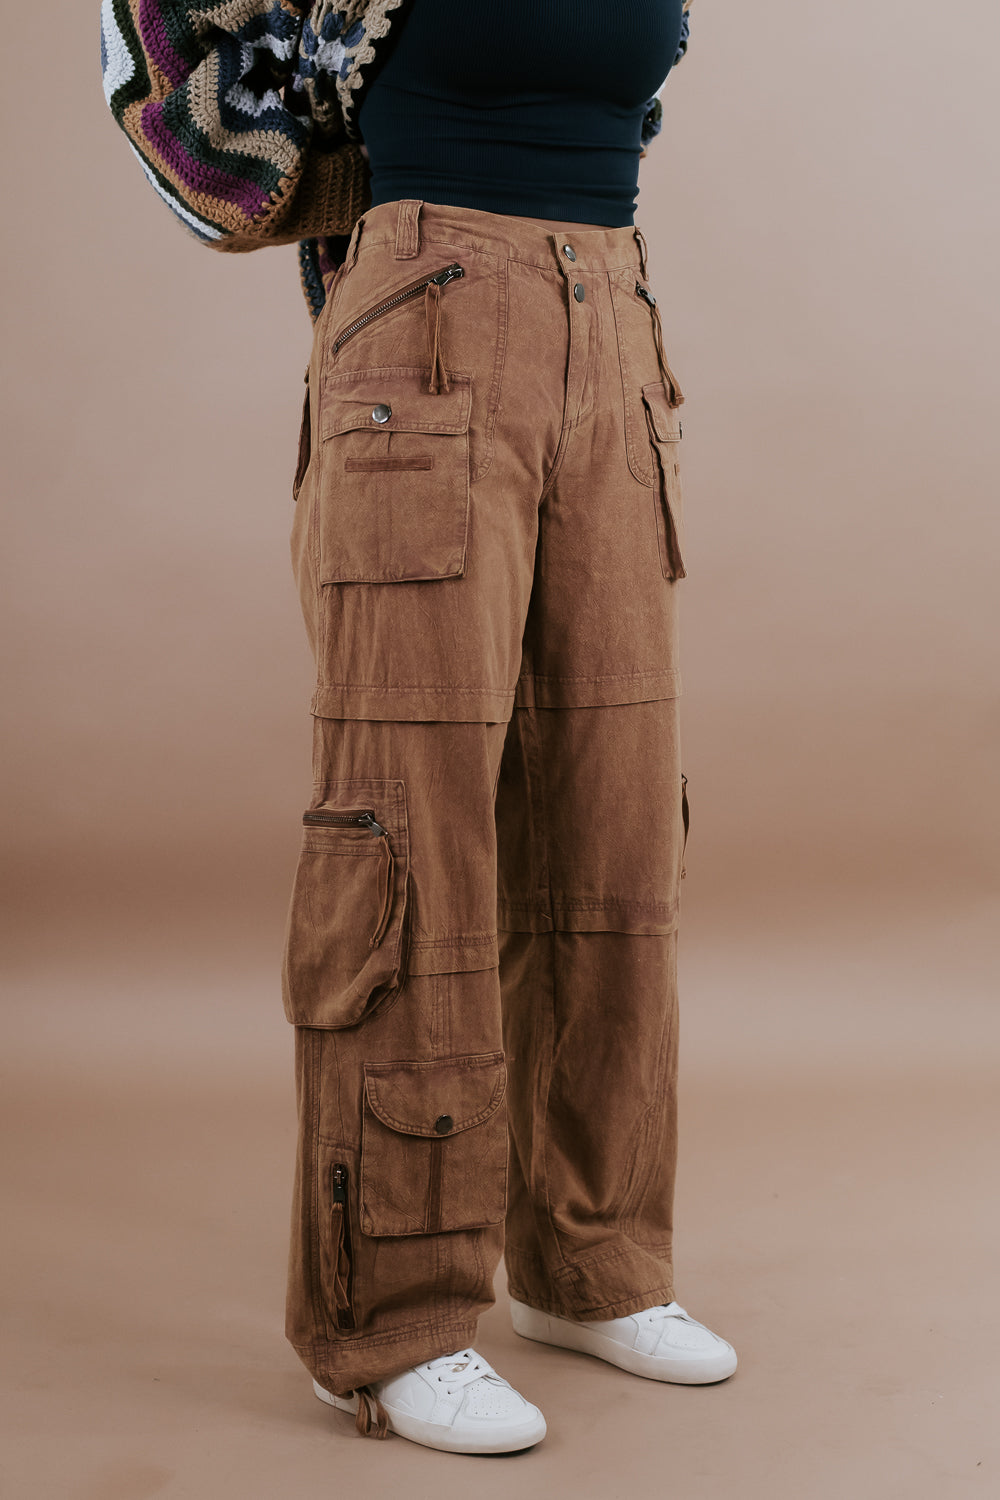 Oli & Hali : Mineral Washed Cargo Pants, Teal – Everyday Chic Boutique